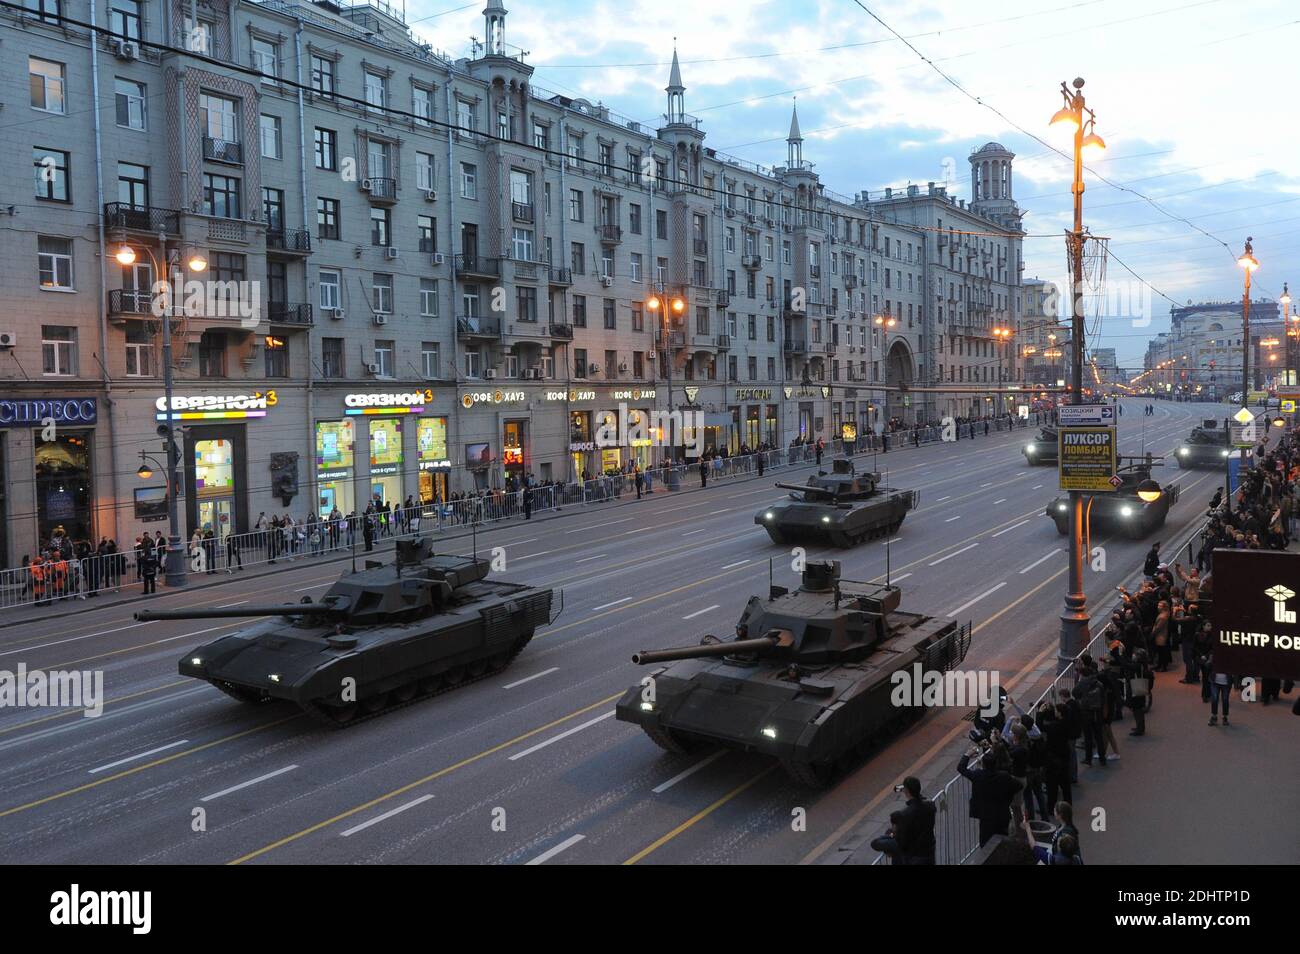 T-14 Armata tanks are seen at the central street.Military equipment on Tverskaya Street before moving towards Red Square for a rehearsal for the Victory Day parade in central Moscow. Stock Photo